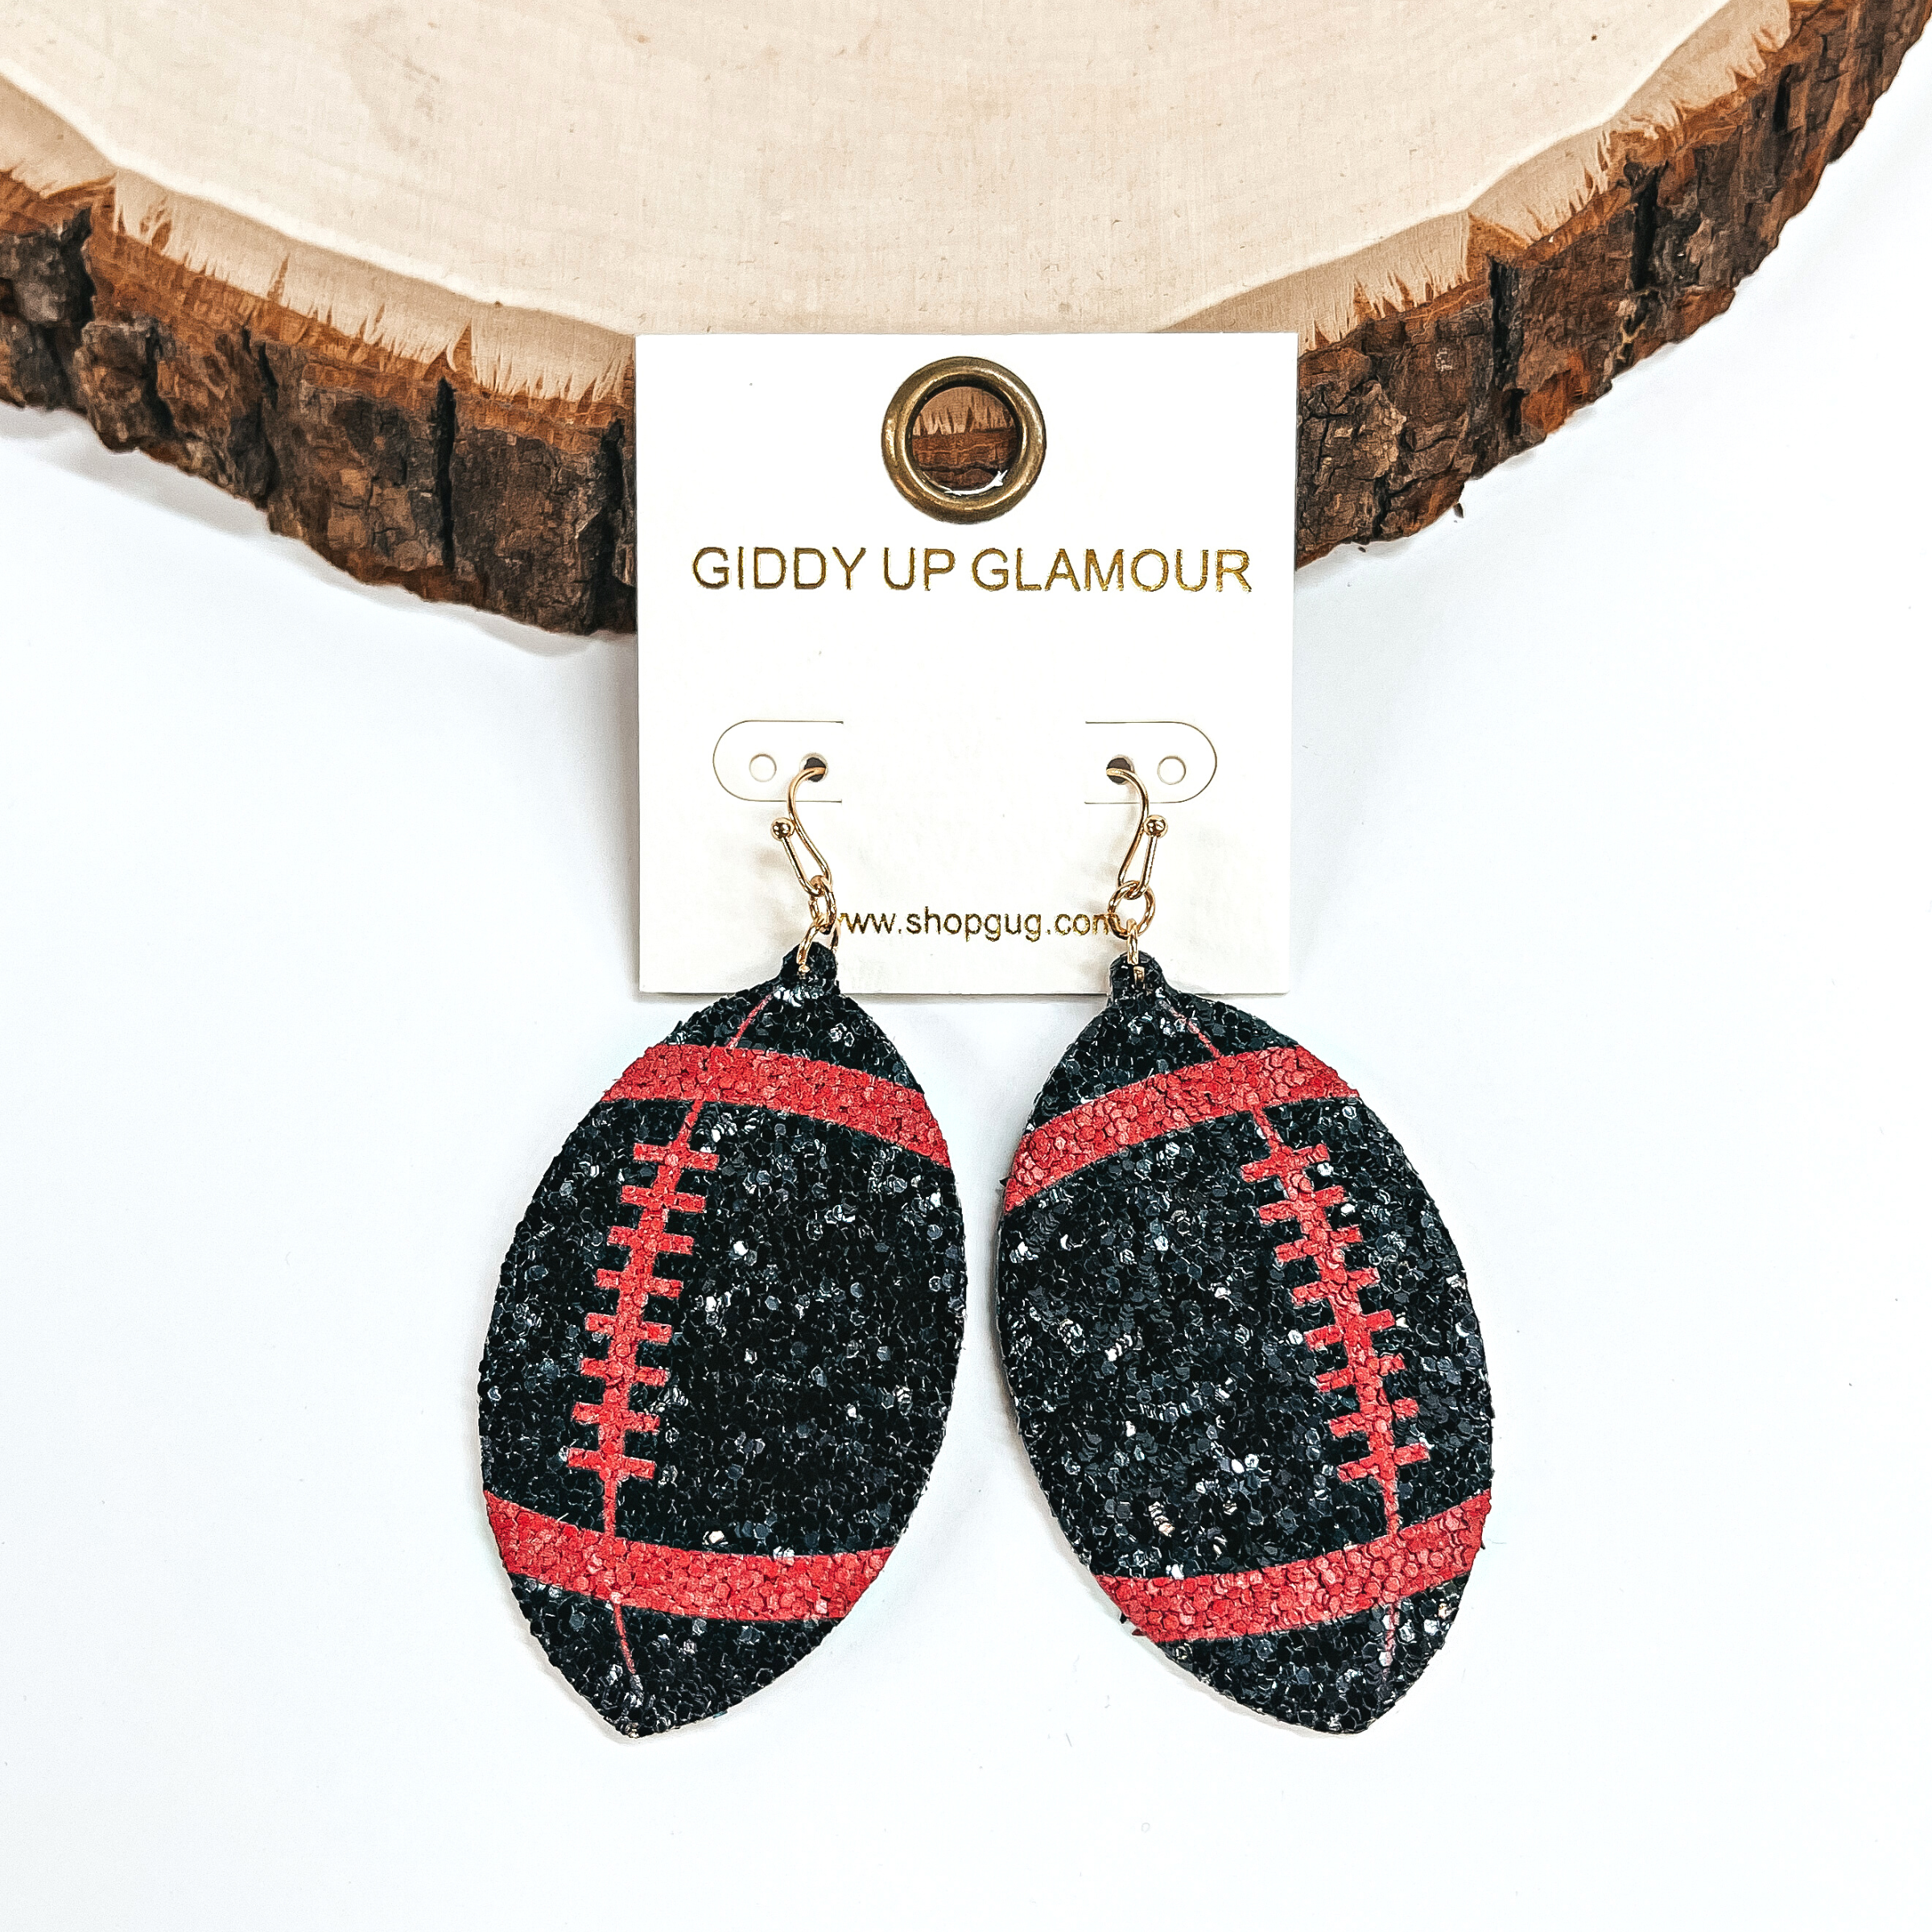 These are football shaped earrings in sequins in red and black. These earrings are leaning up against a slab of wood and on a white background.